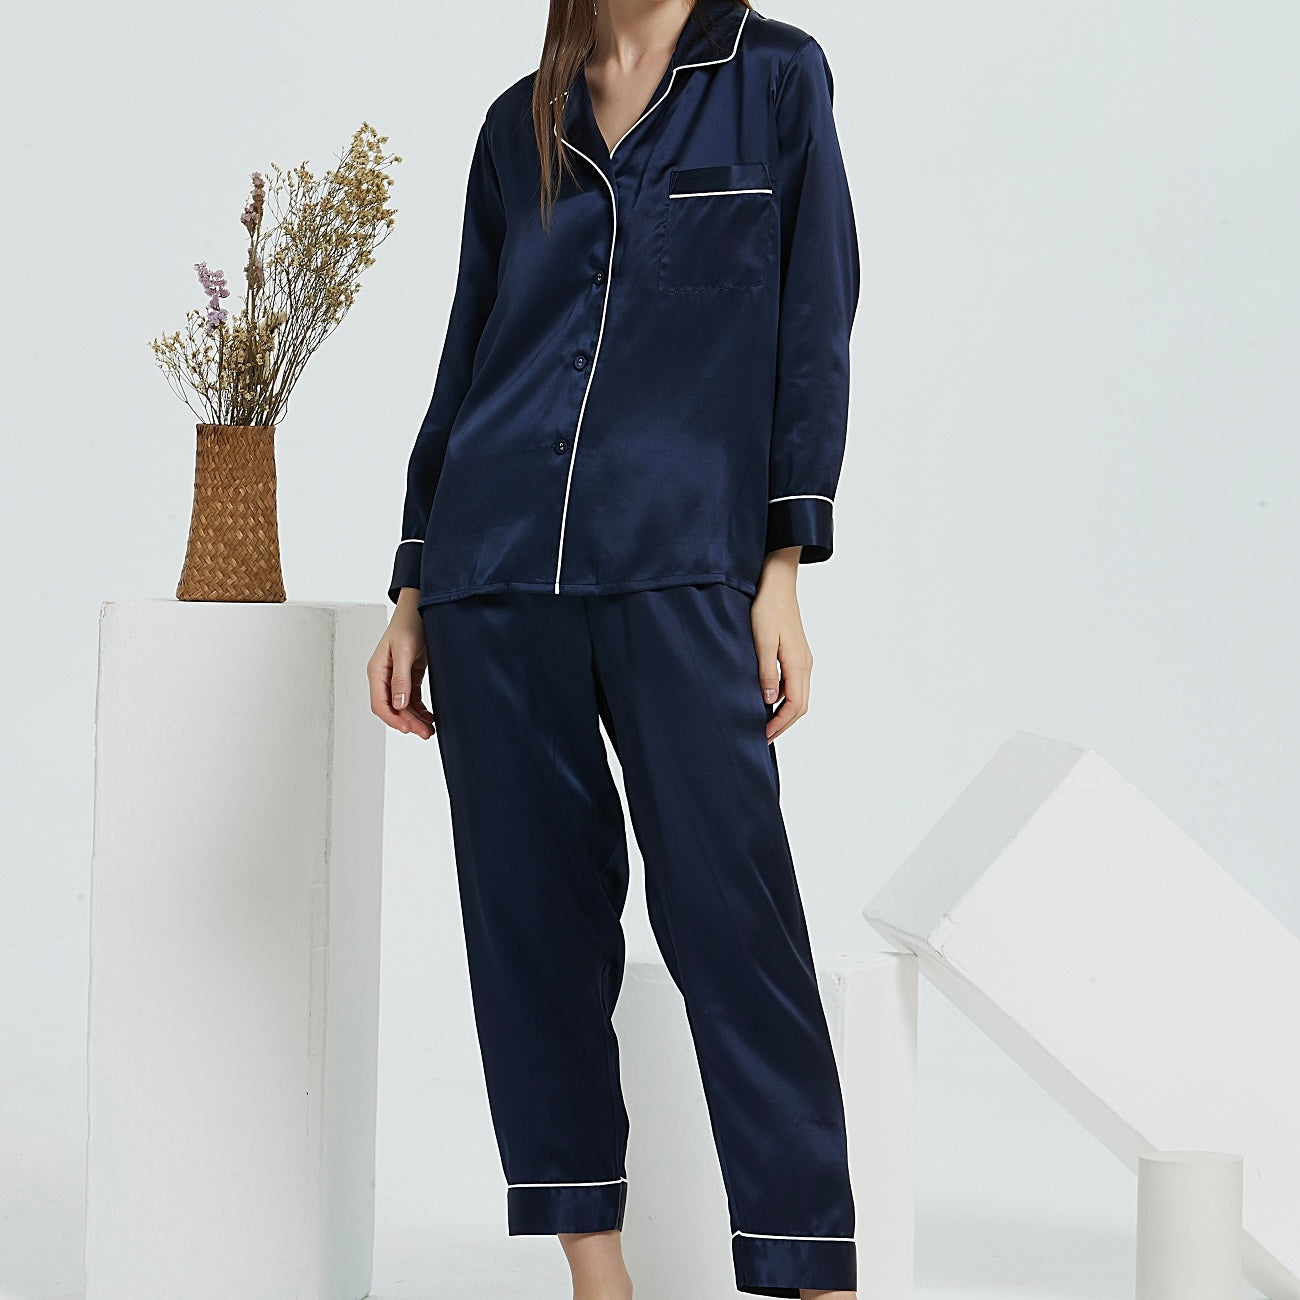 White Trousseau’s Pure Mulberry Silk Long Pyjamas Set in Navy. High quality and breathable, our silk pyjamas set will make you feel stylish while lounging at home. It is the best sleepwear for Singapore weather!